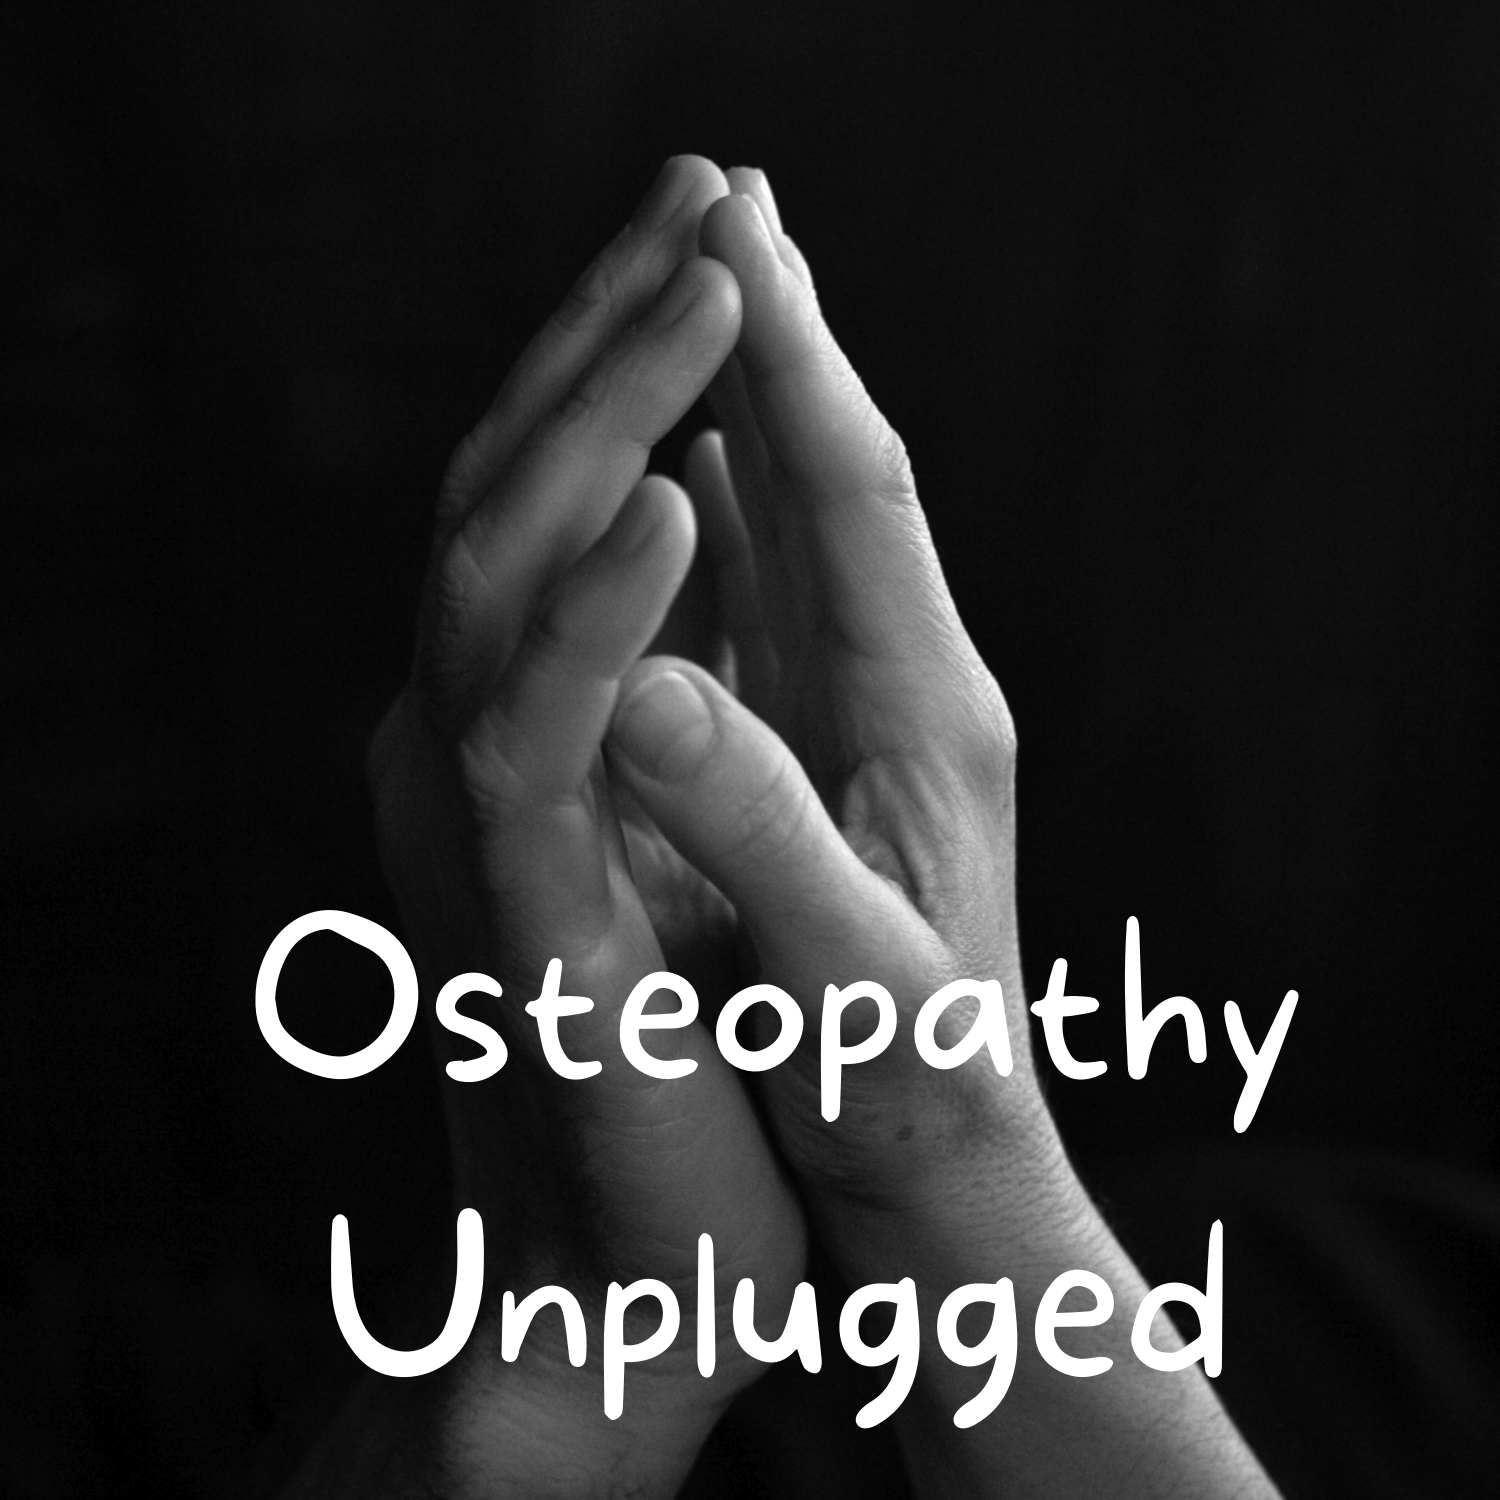 Episode 6 - The First Osteopathic Treatment